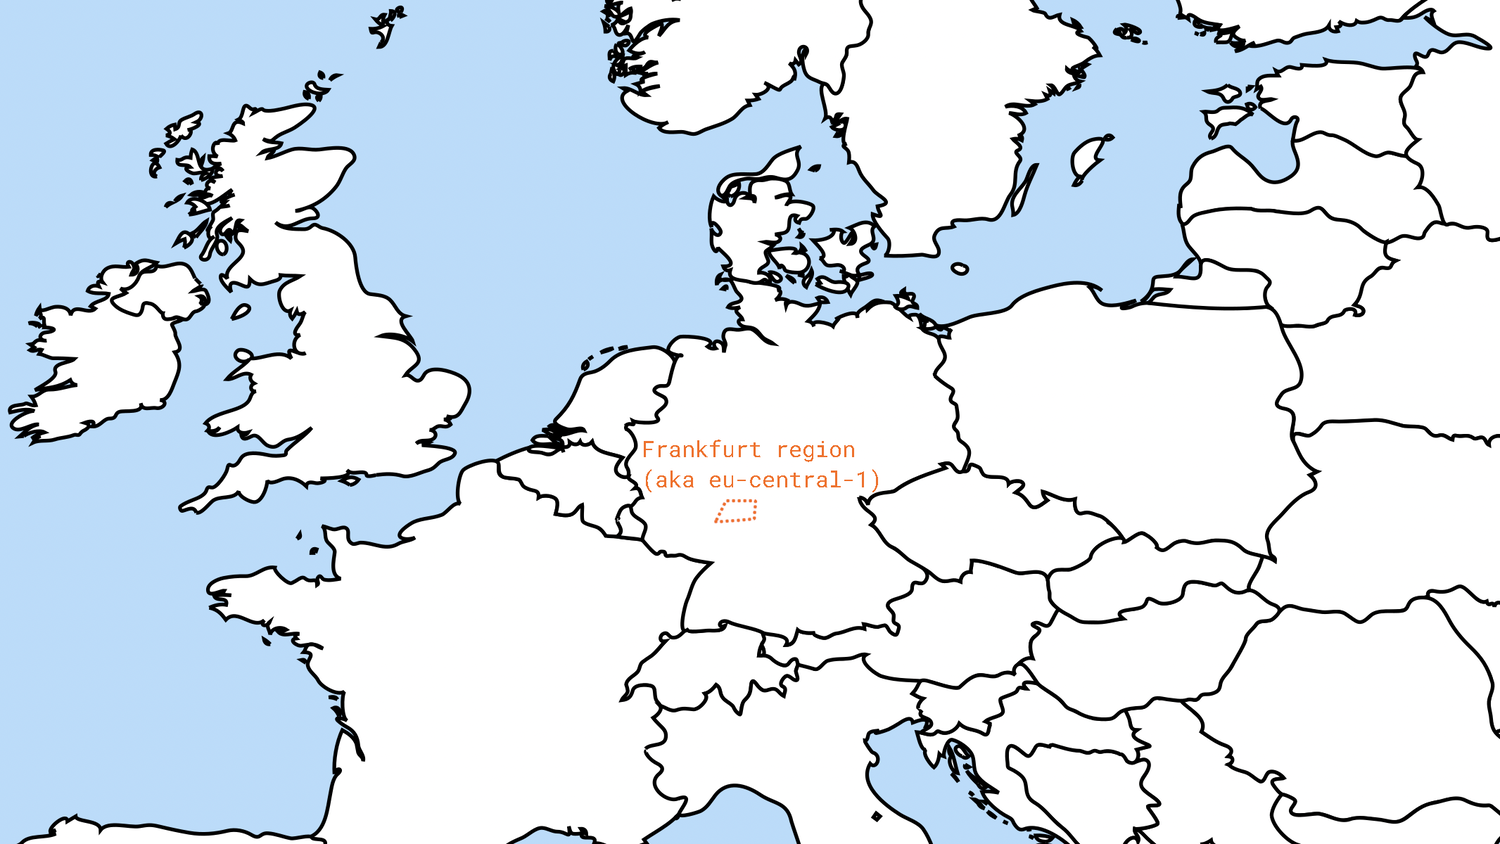 One of AWS Regions, “Frankfurt” also known as “eu-central-1”, depicted by area within dots.